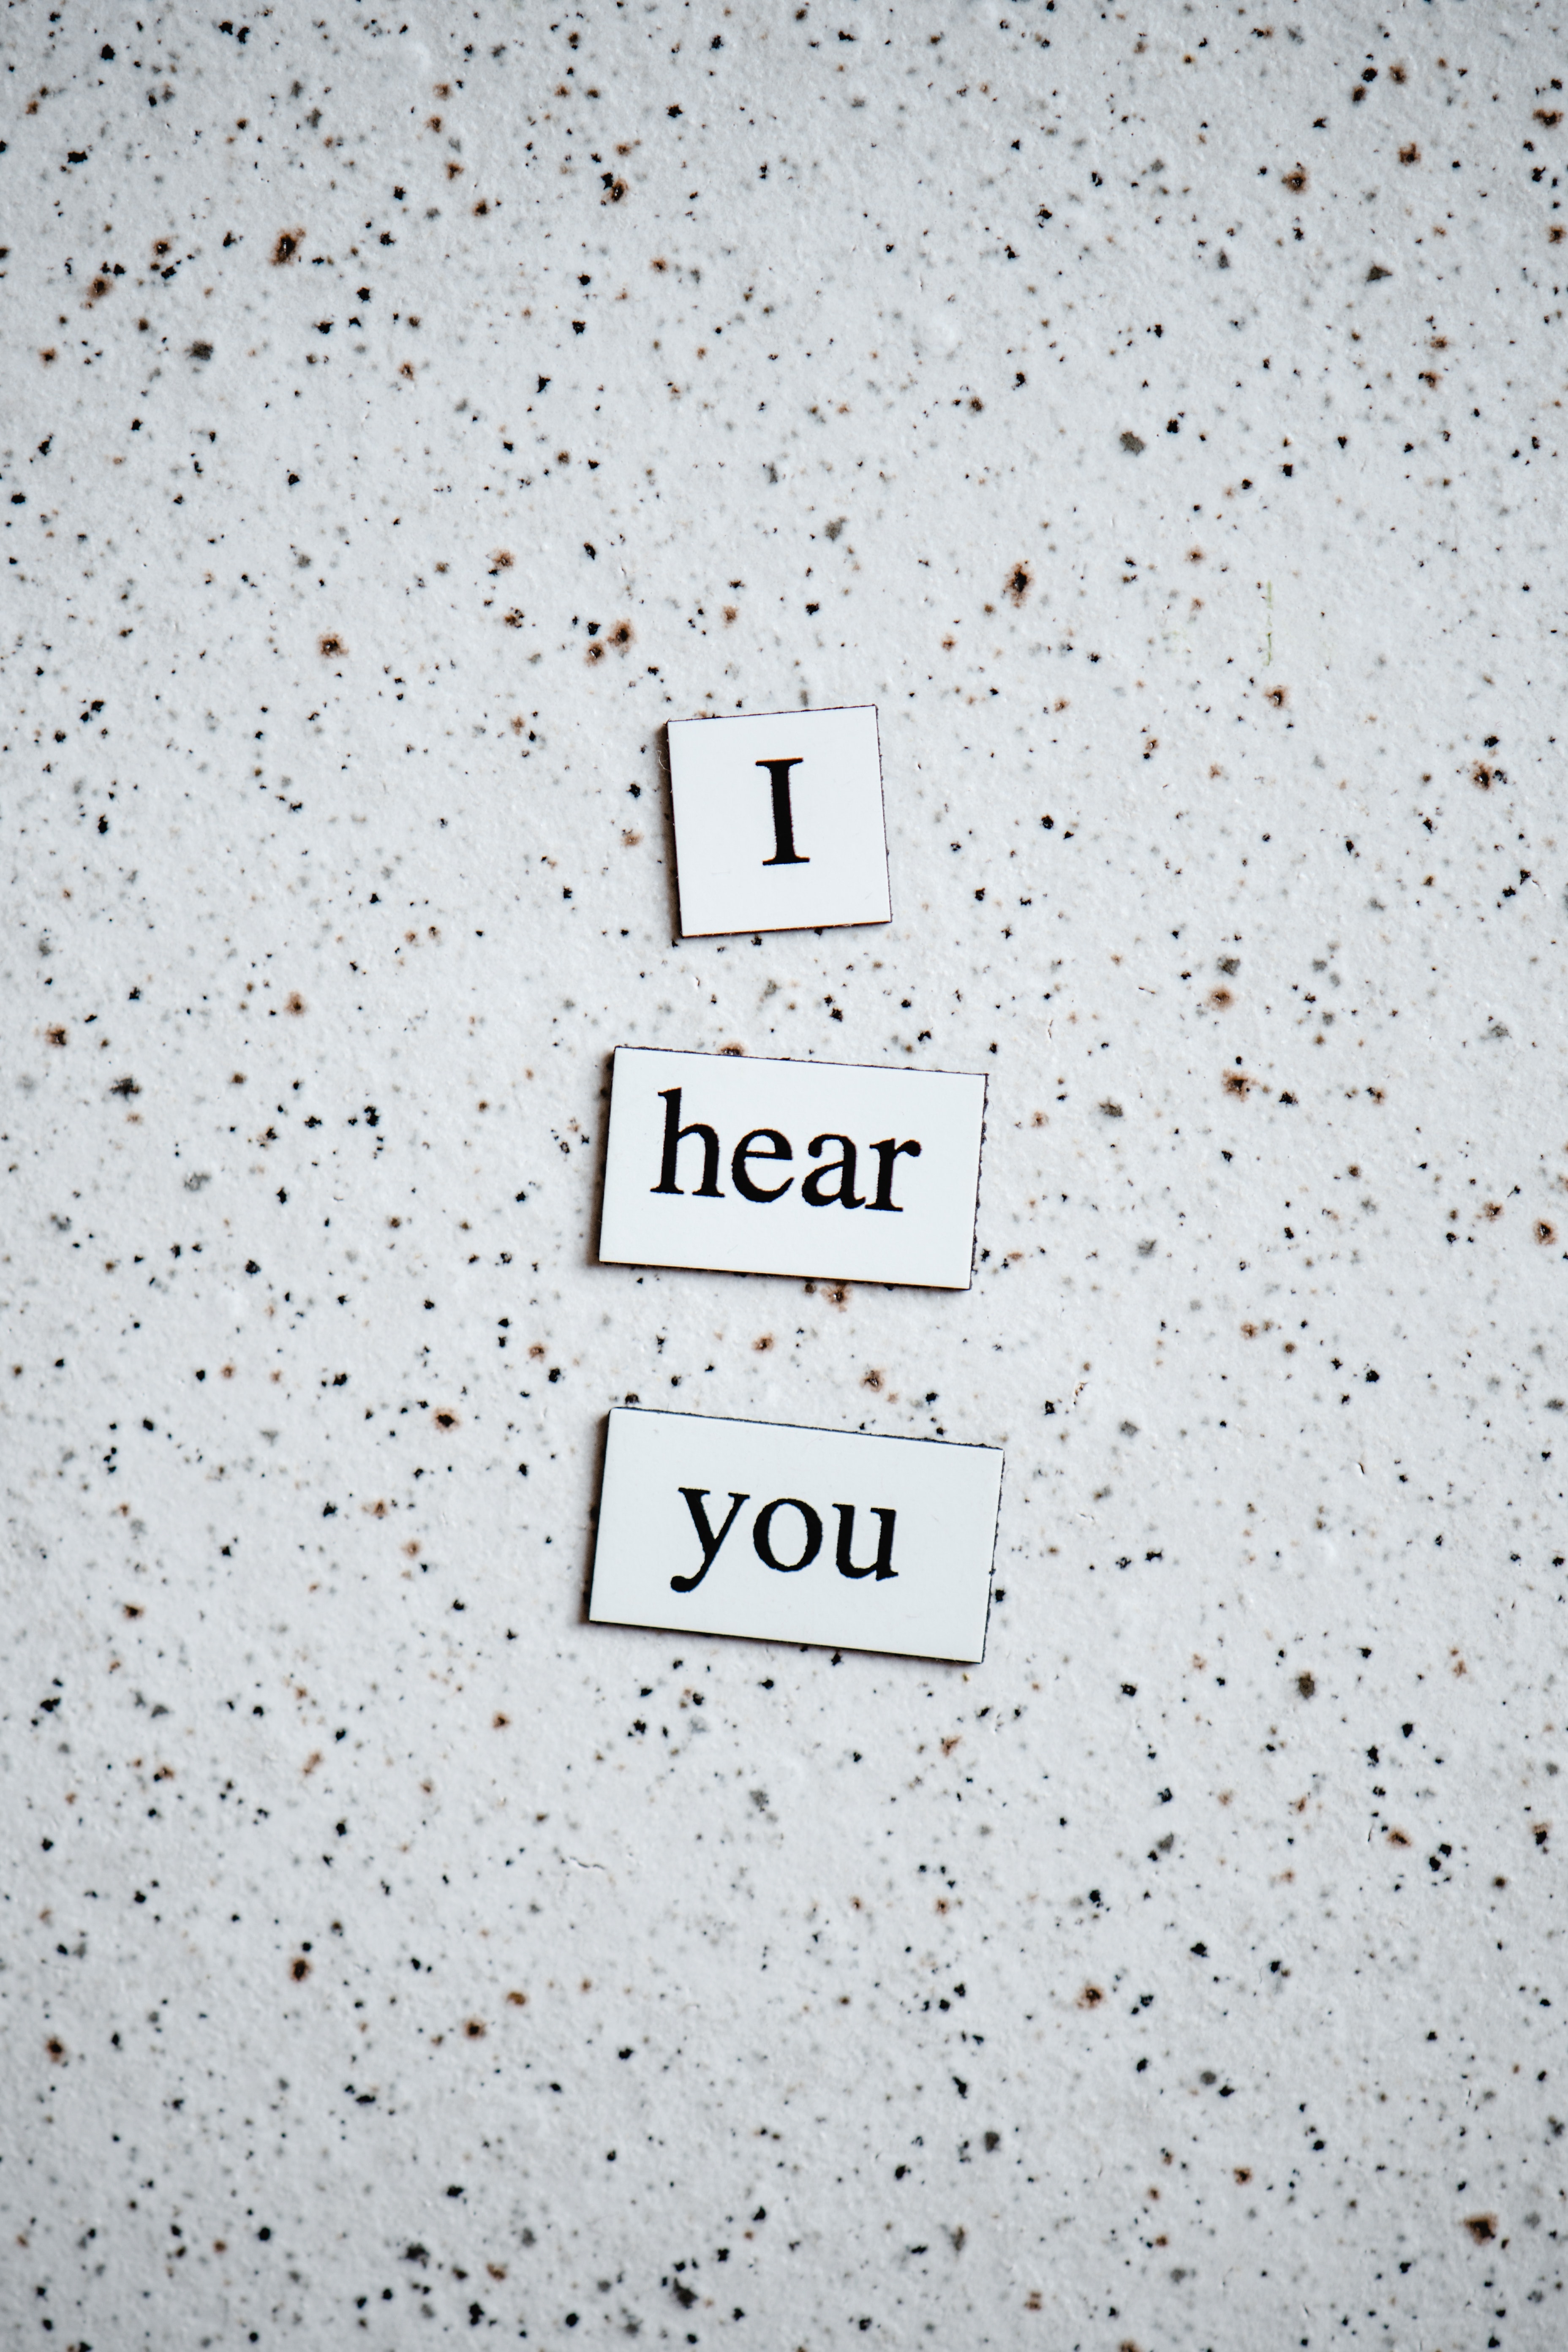 Image of a banner who says 'I hear you'